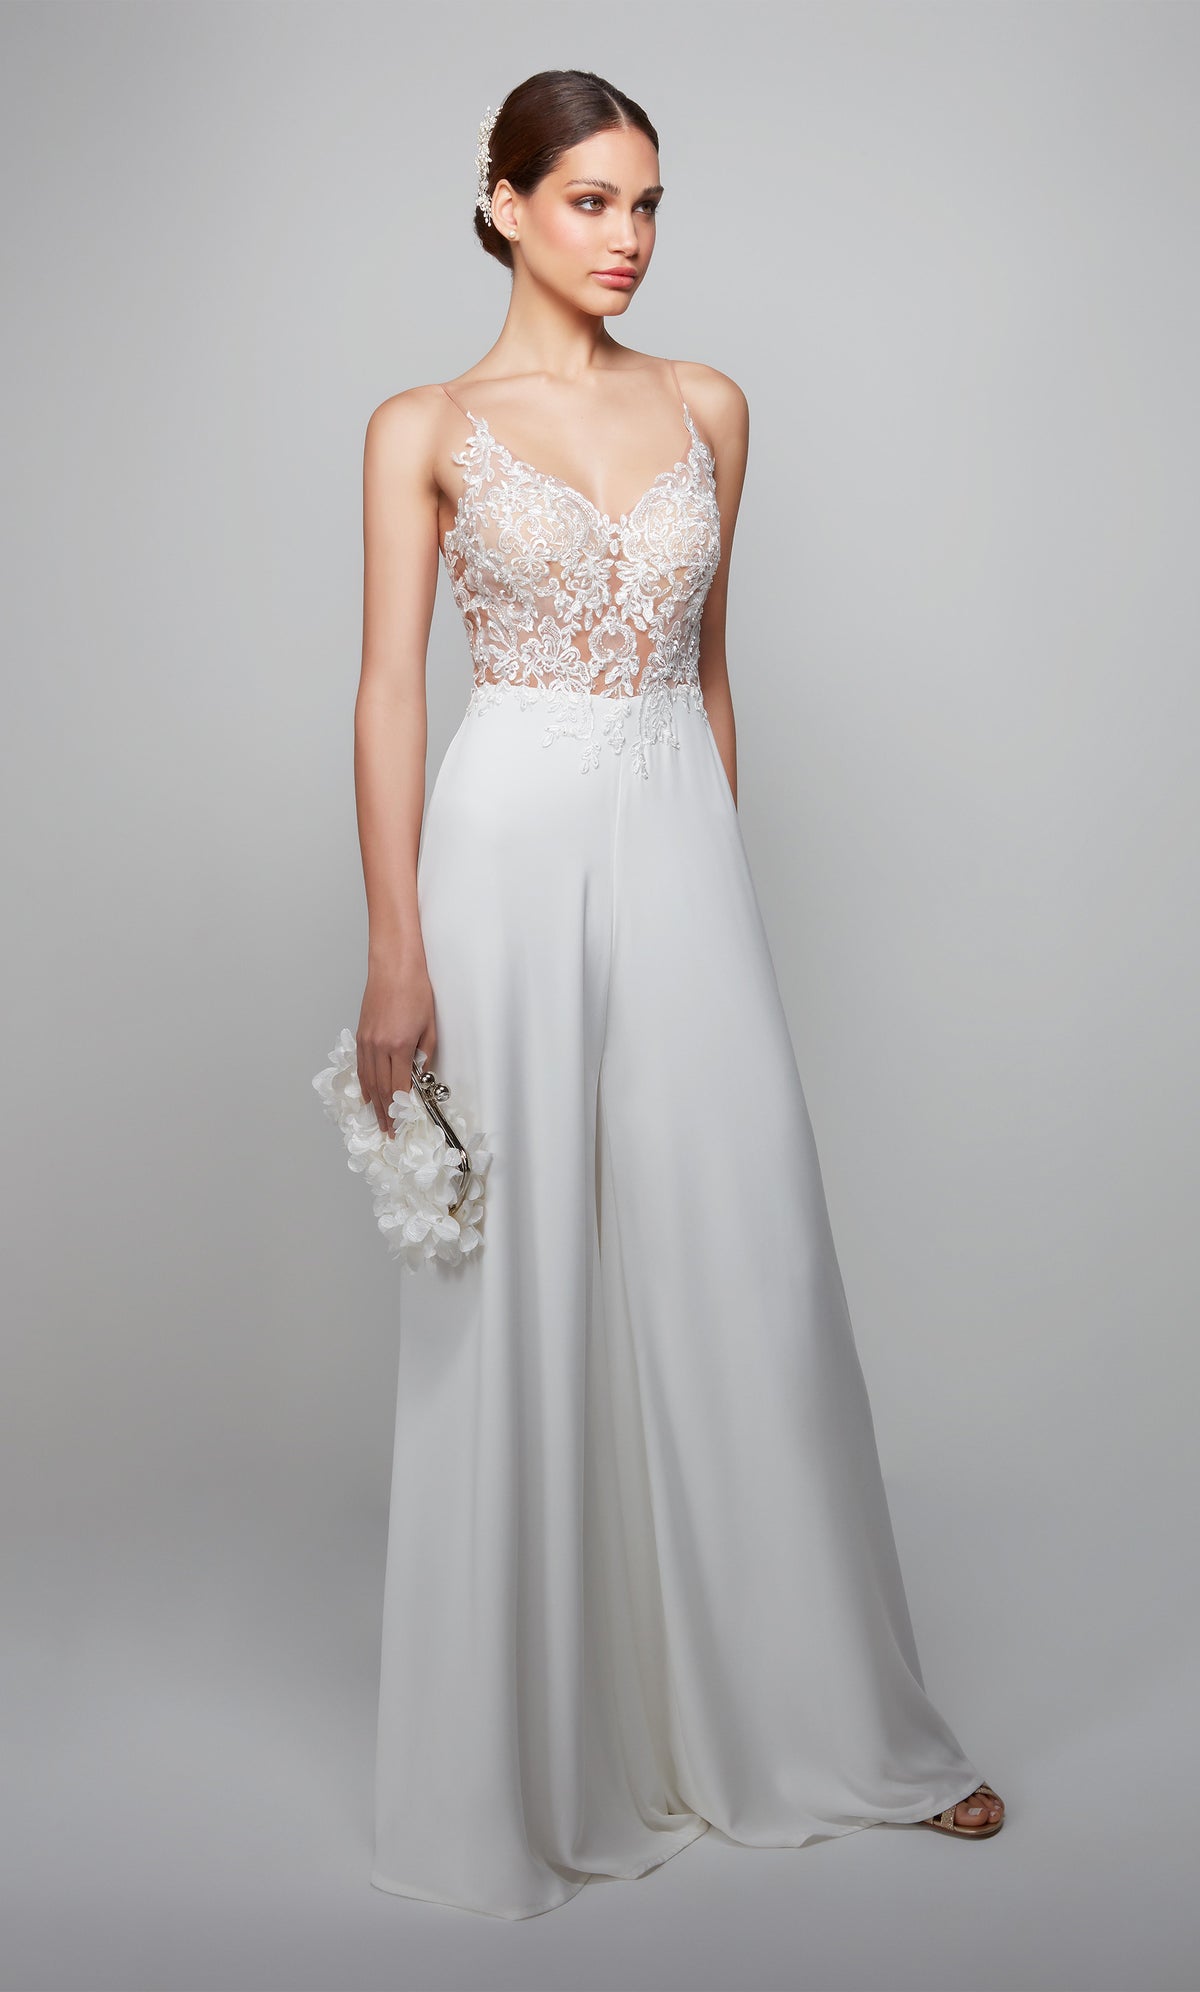 Ivory lace wedding jumpsuit with a sheer V neck bodice.